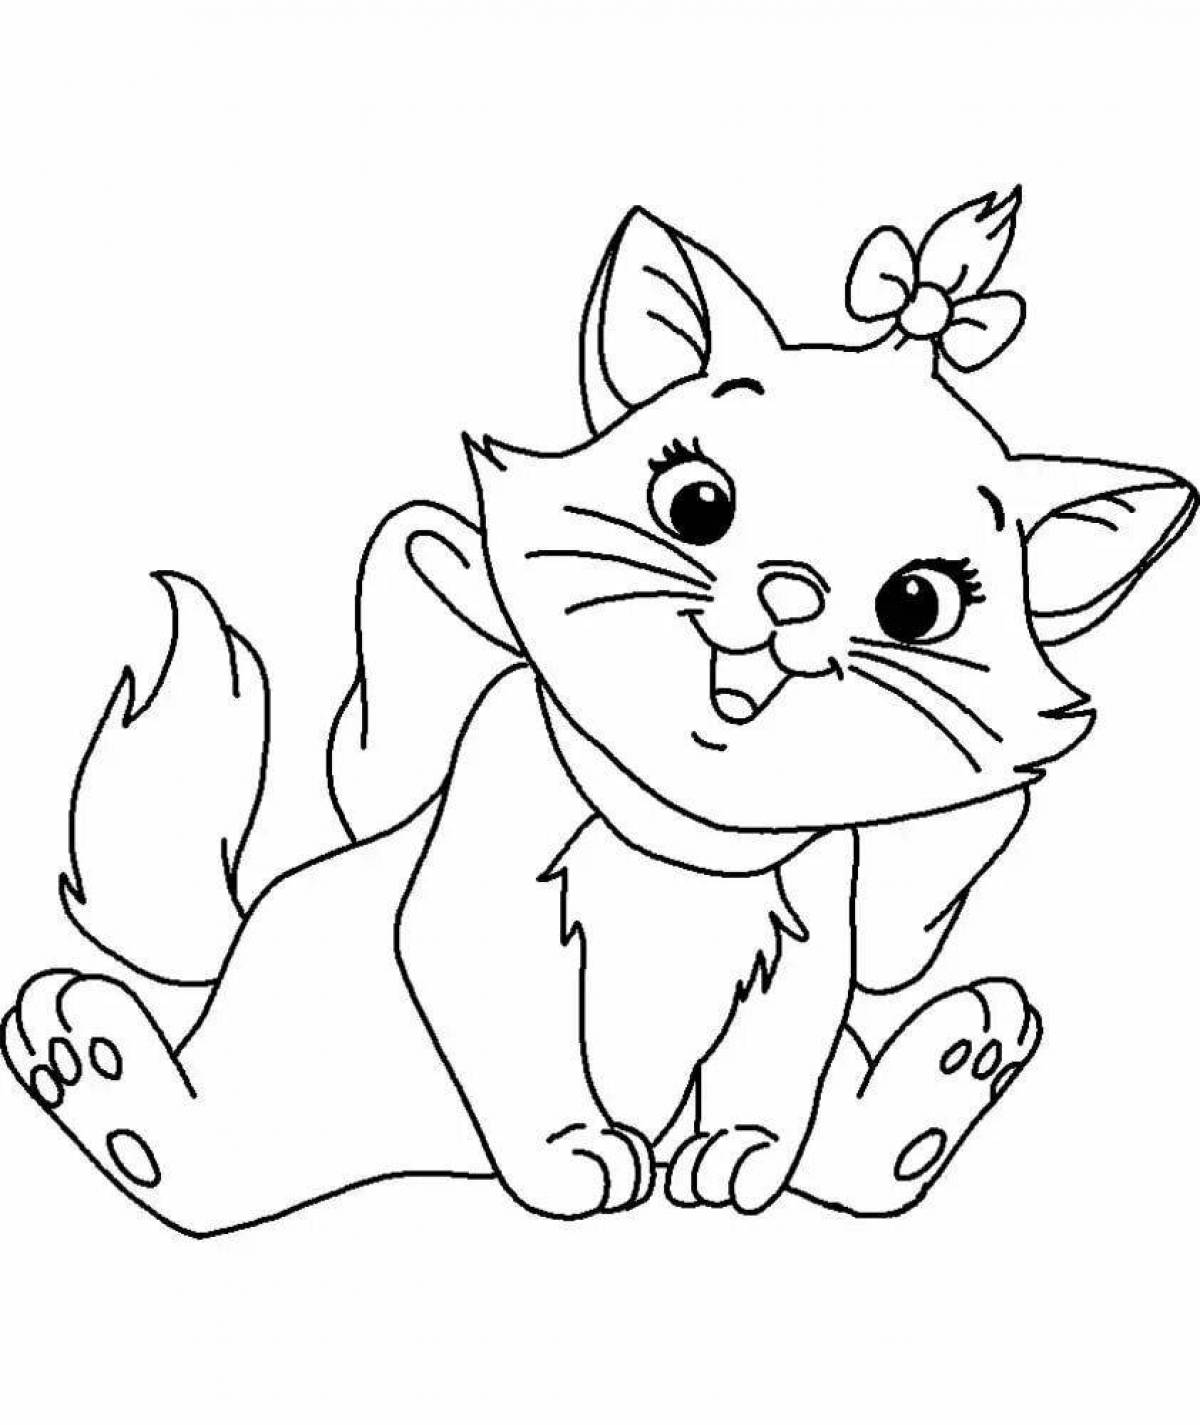 Friendly cat coloring